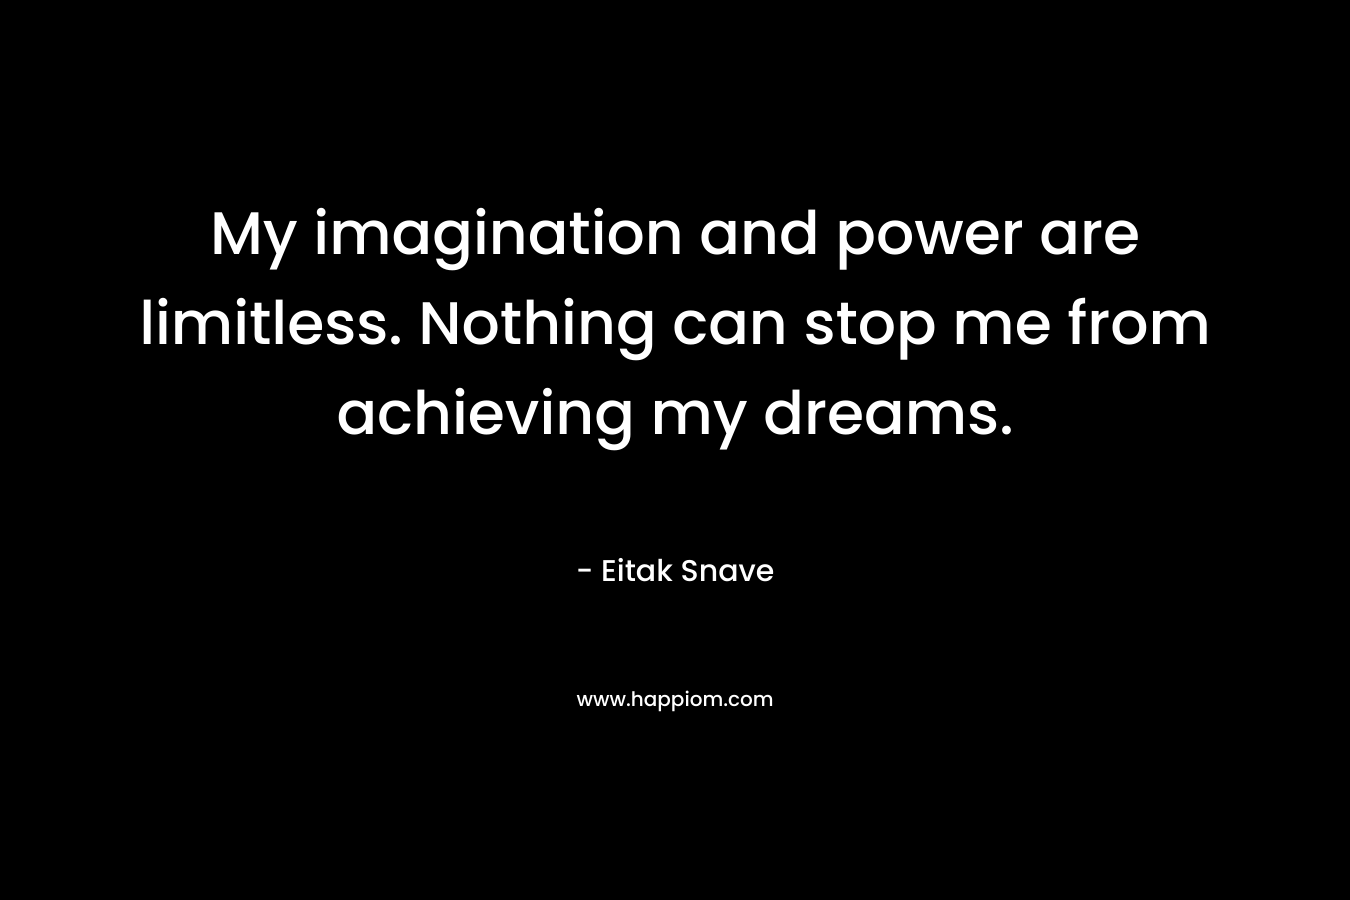 My imagination and power are limitless. Nothing can stop me from achieving my dreams.